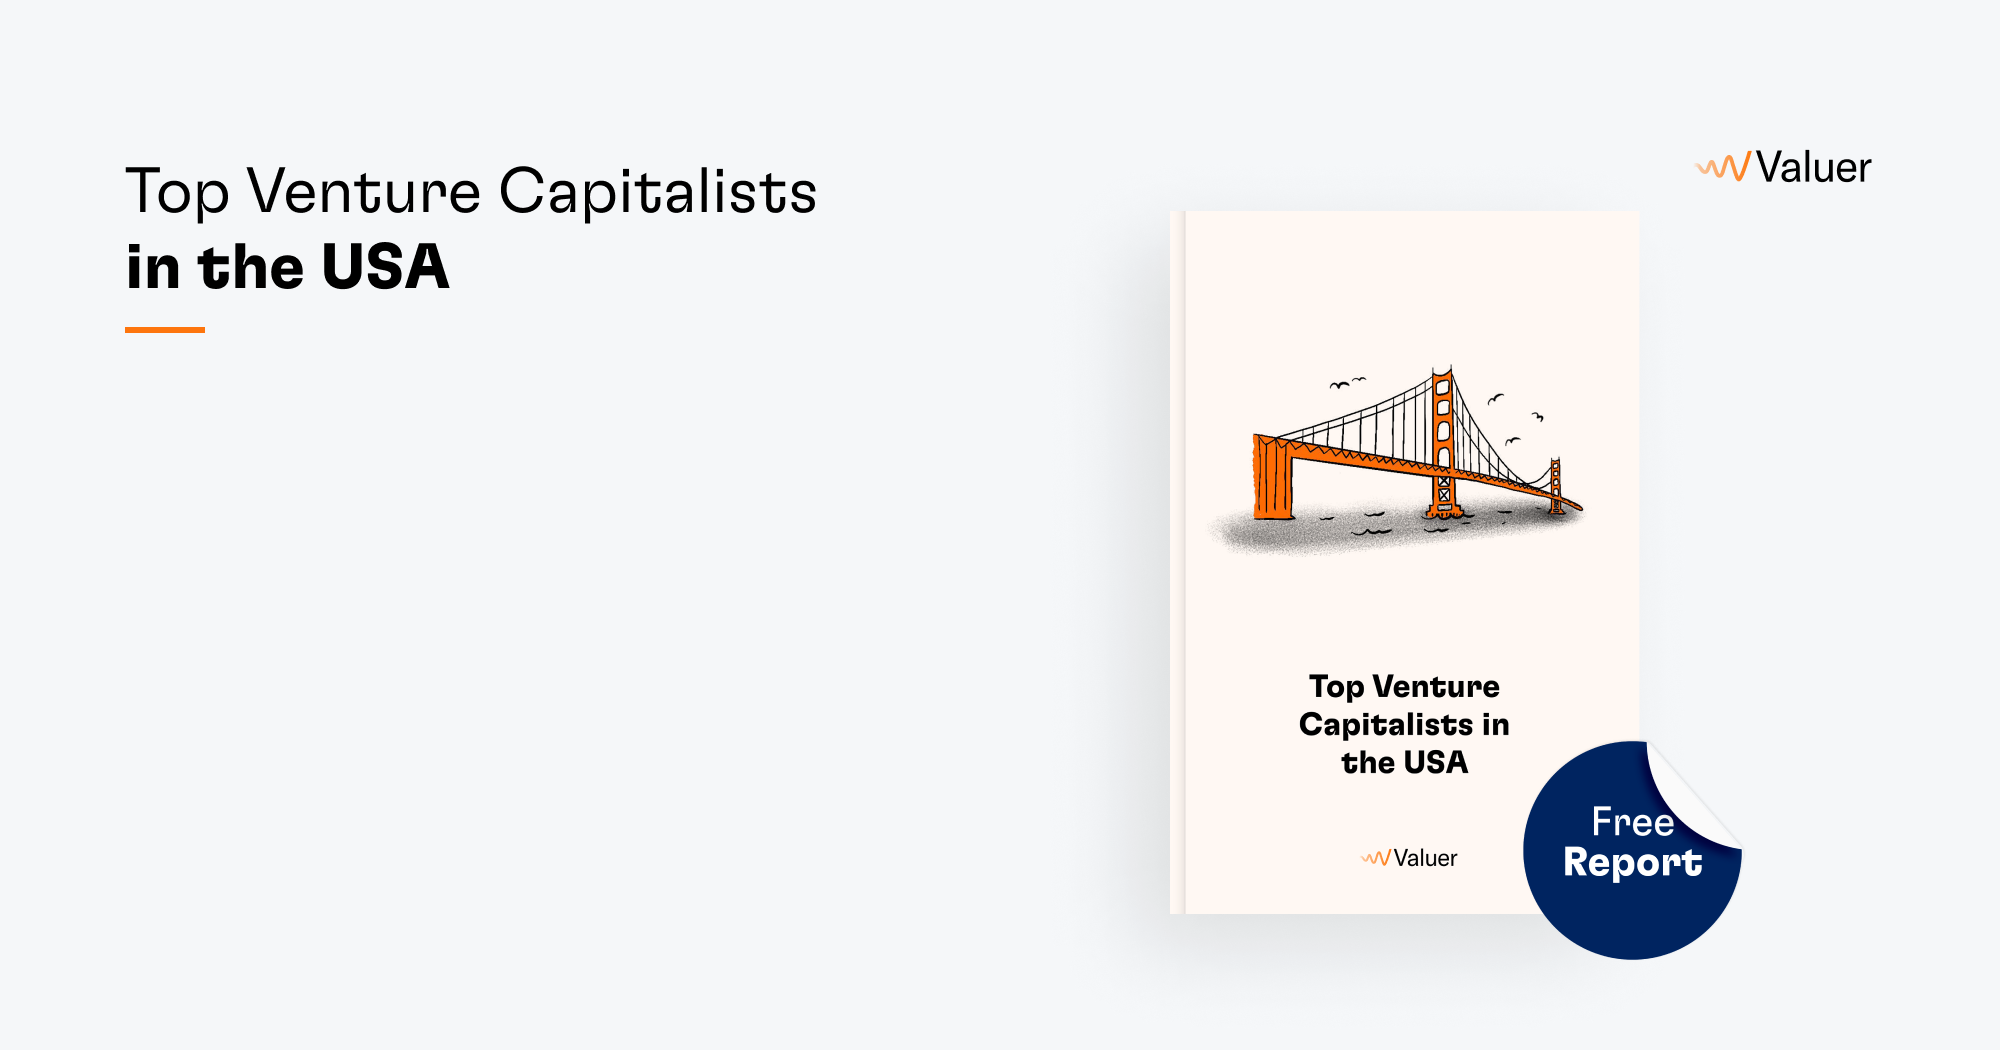 100 Top Venture Capitalists in the USA